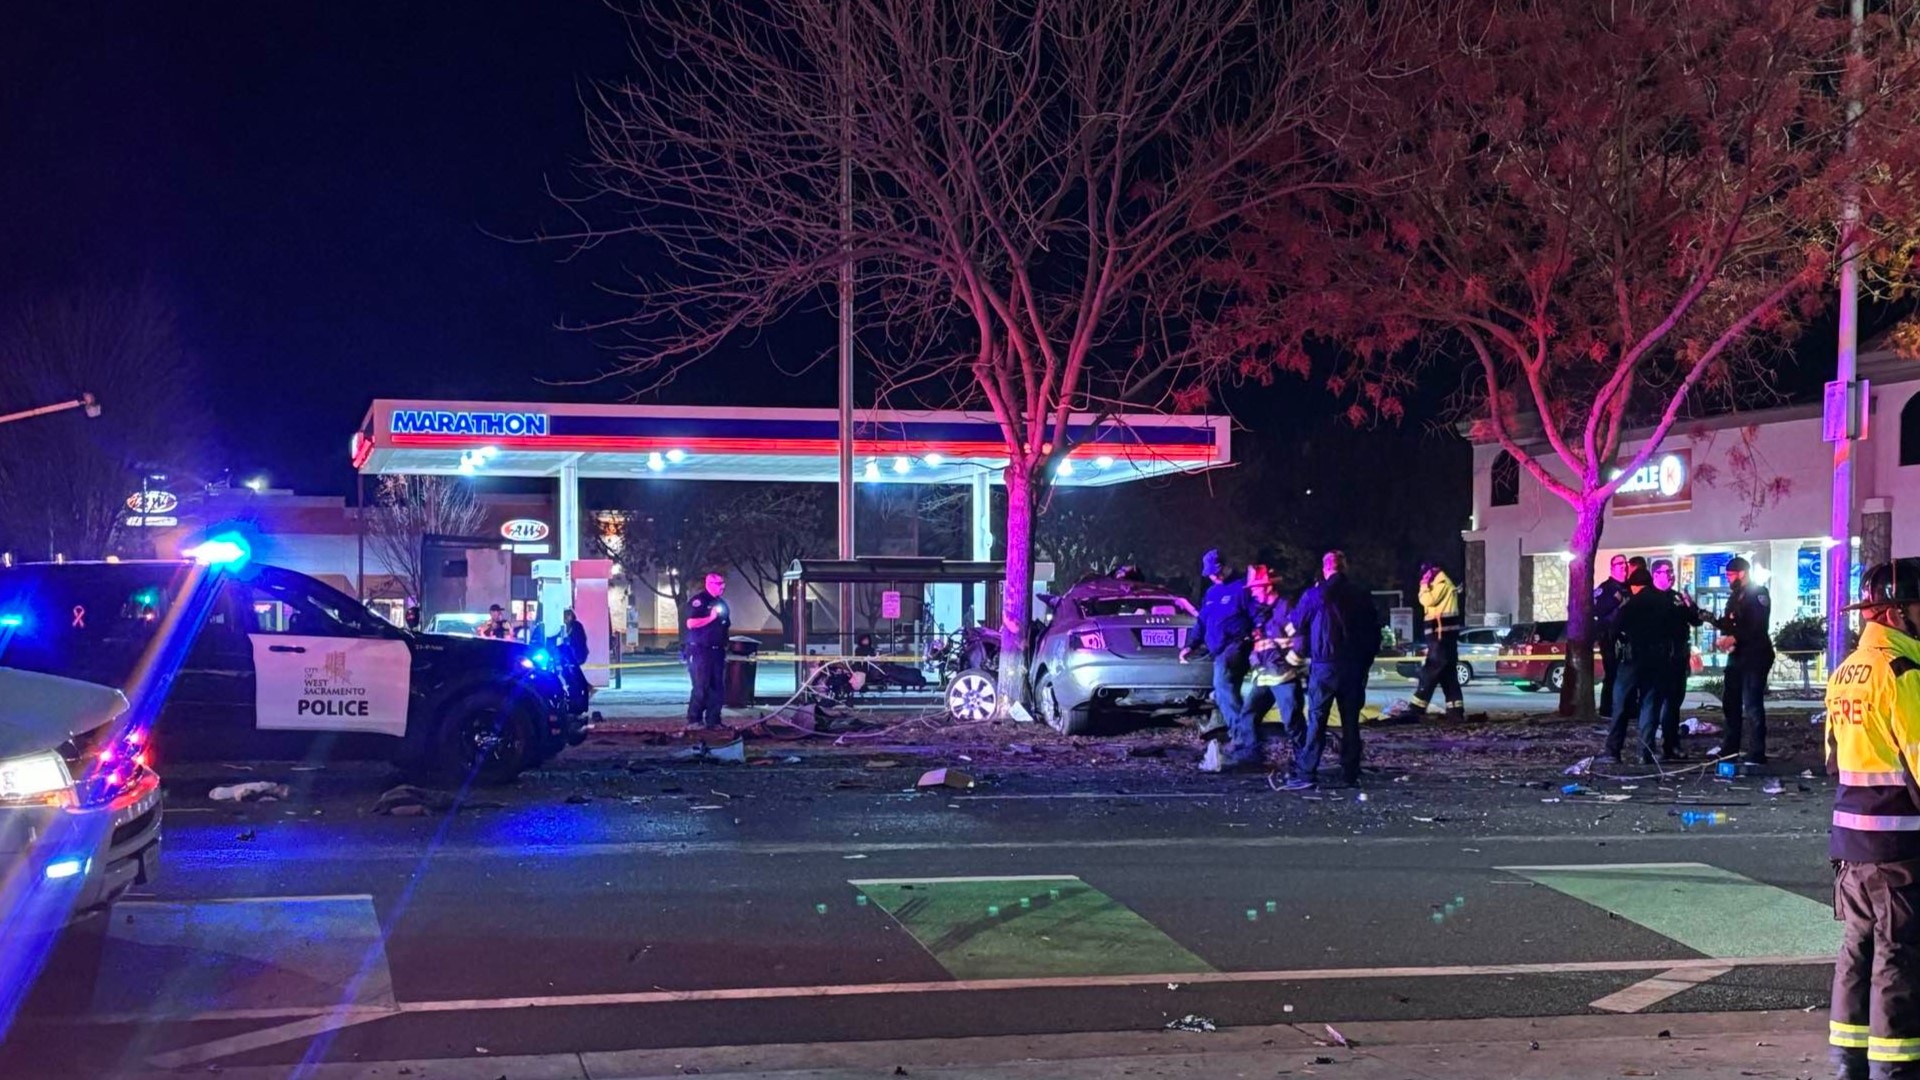 West Sacramento police are investigating a major traffic accident Monday night.